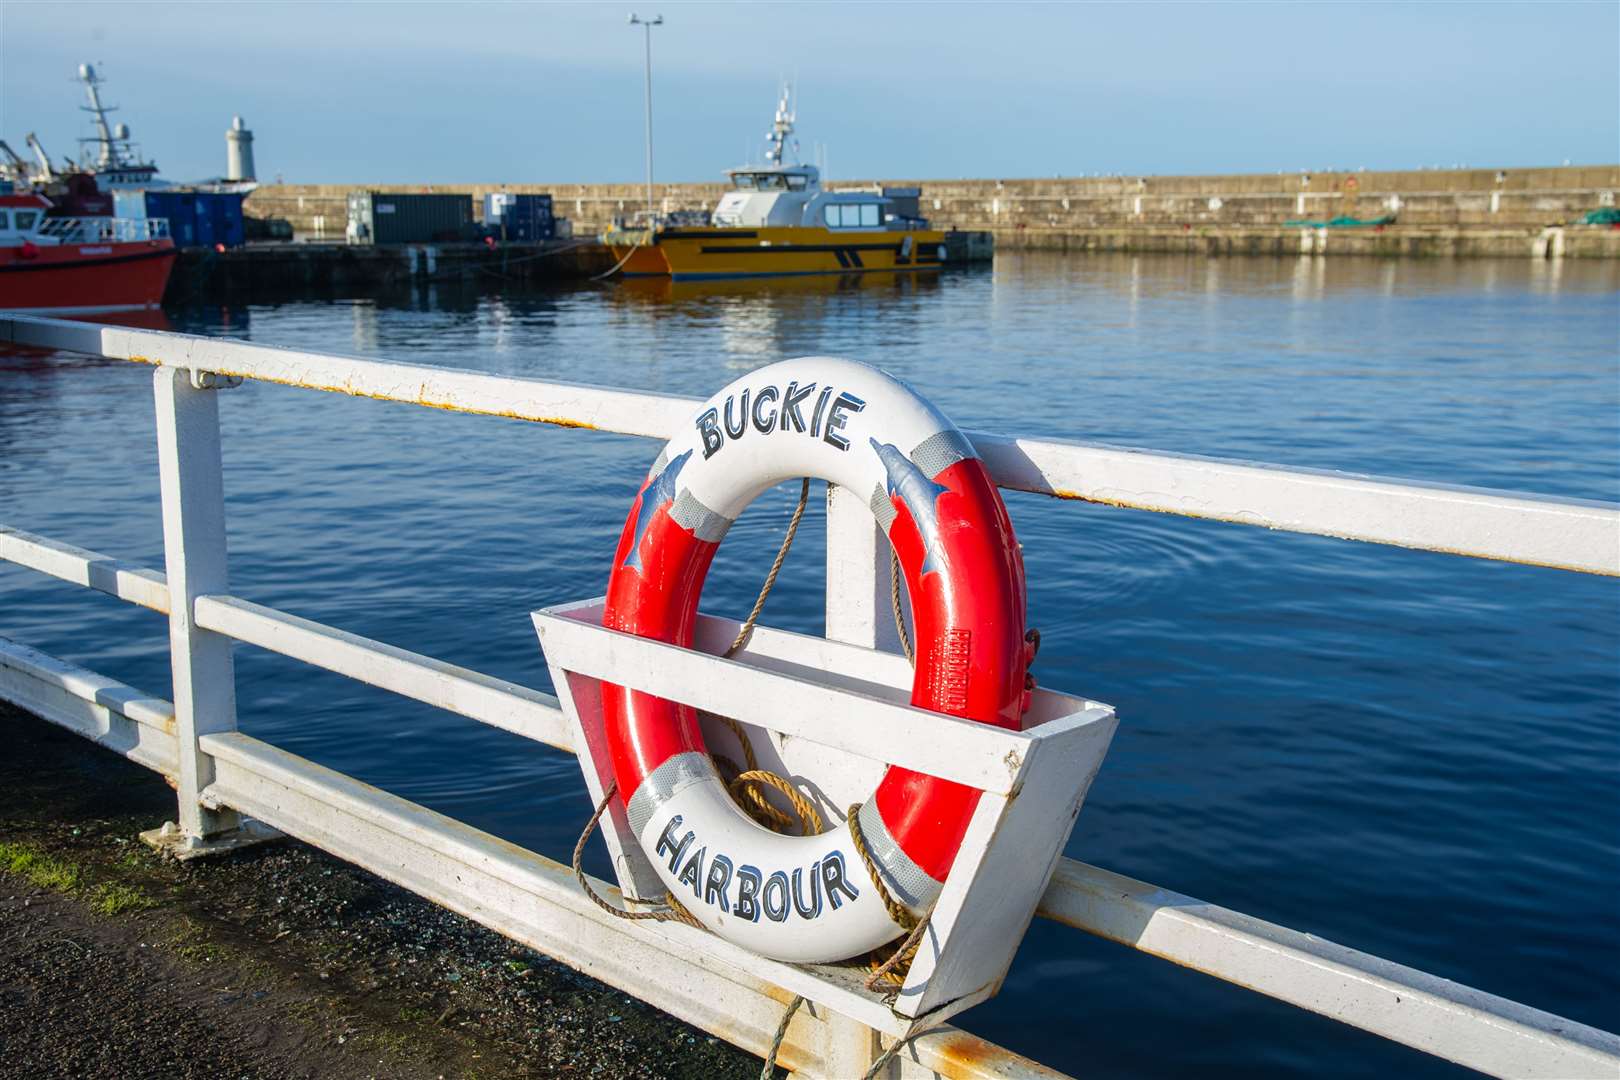 Fish landings at Buckie were up. Picture: Daniel Forsyth